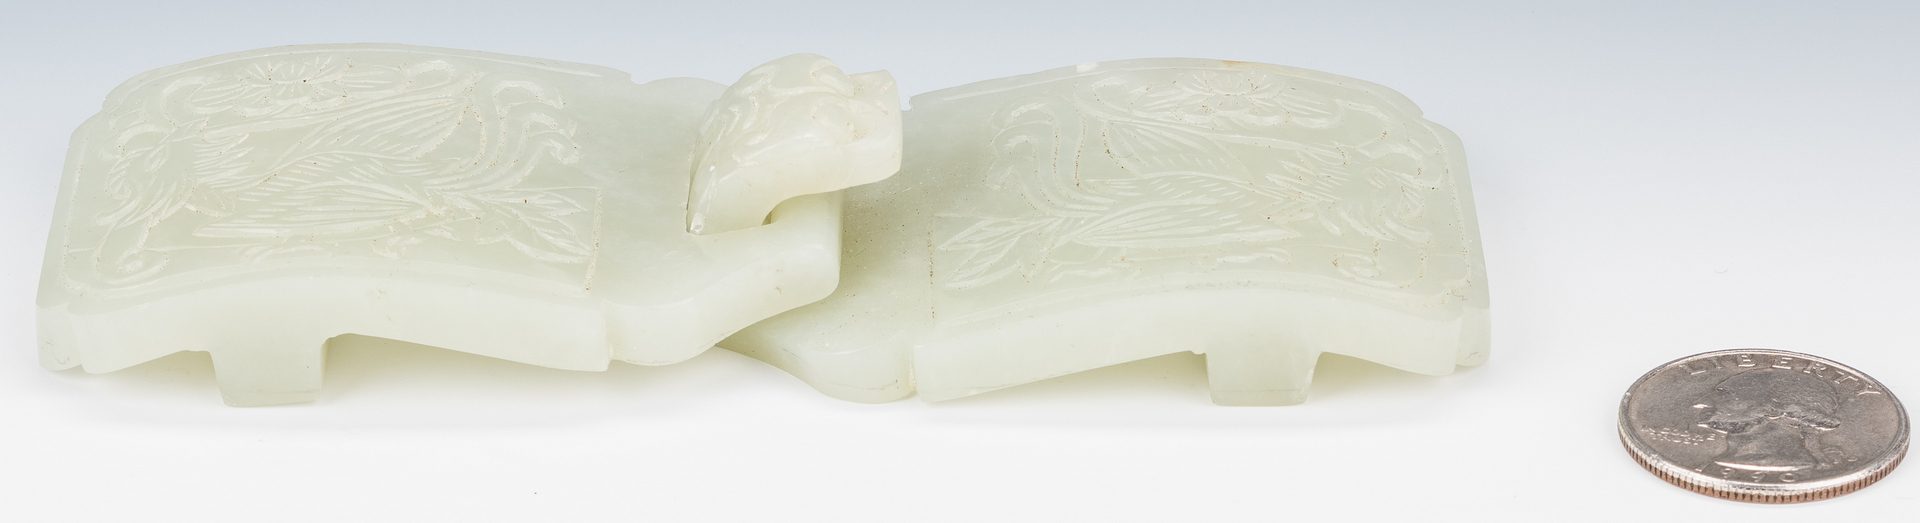 Lot 17: Chinese Carved Jade Double Belt Buckle